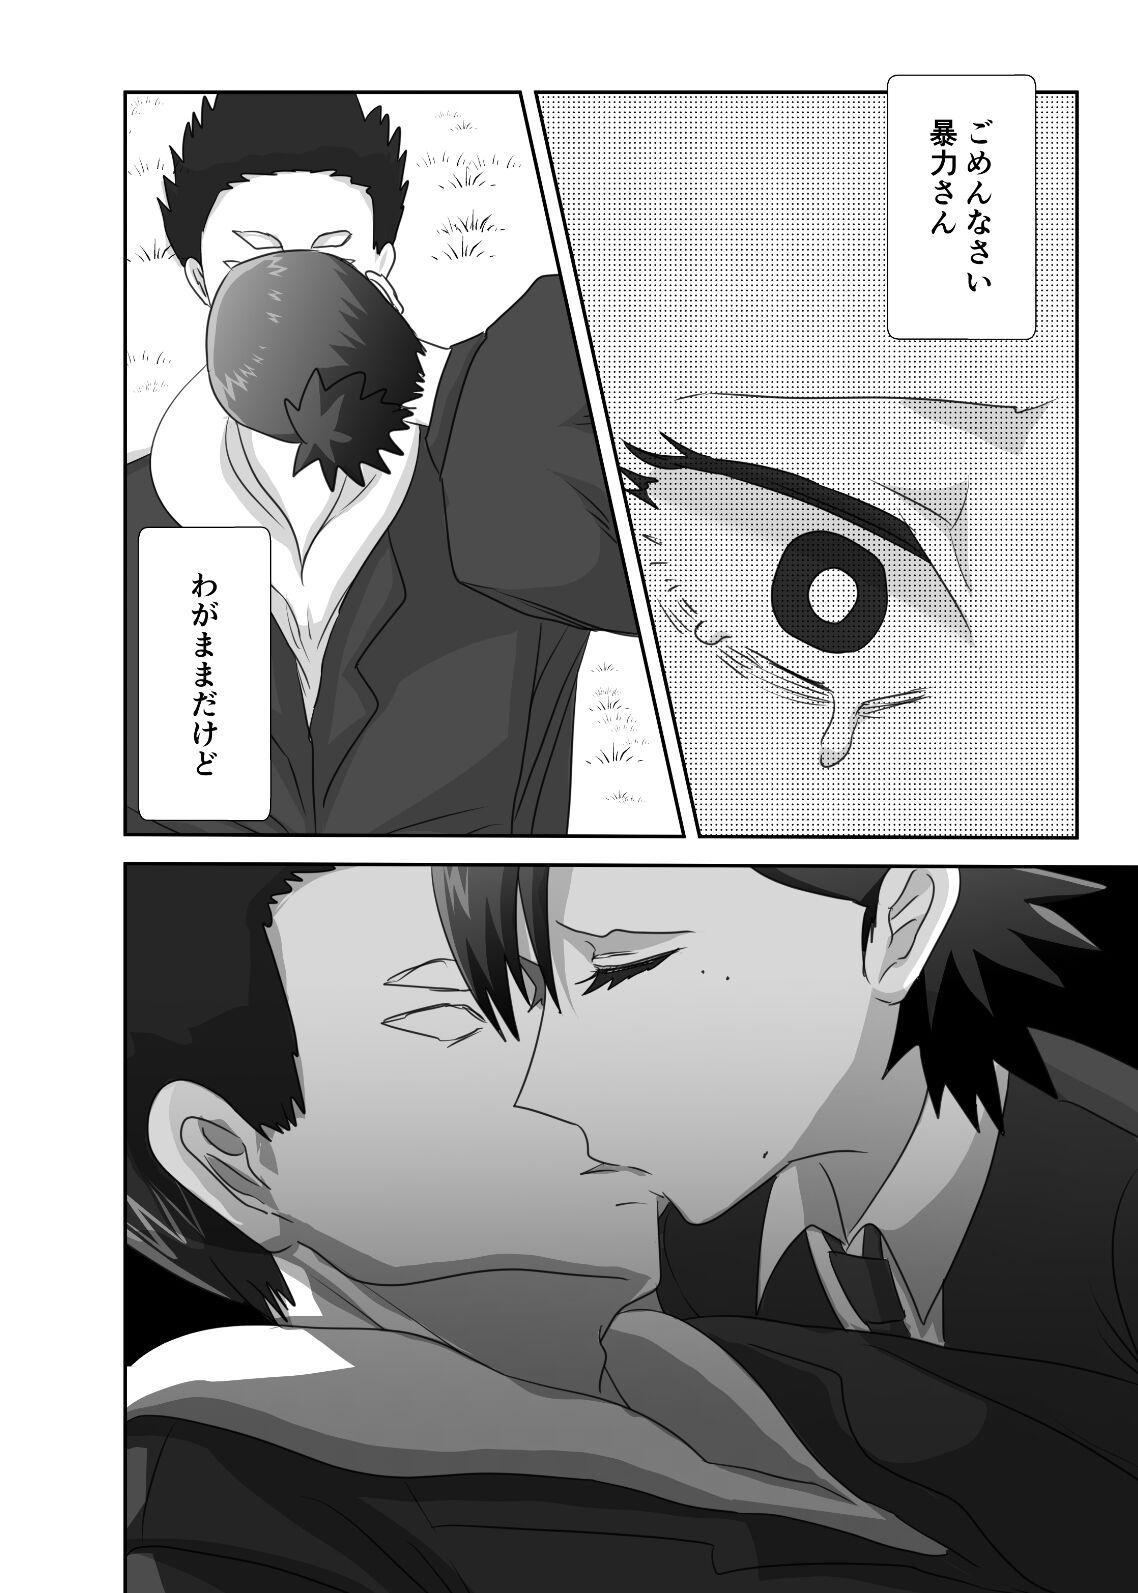 Coeds LAST KISS - Chainsaw man Gay Cash - Page 38